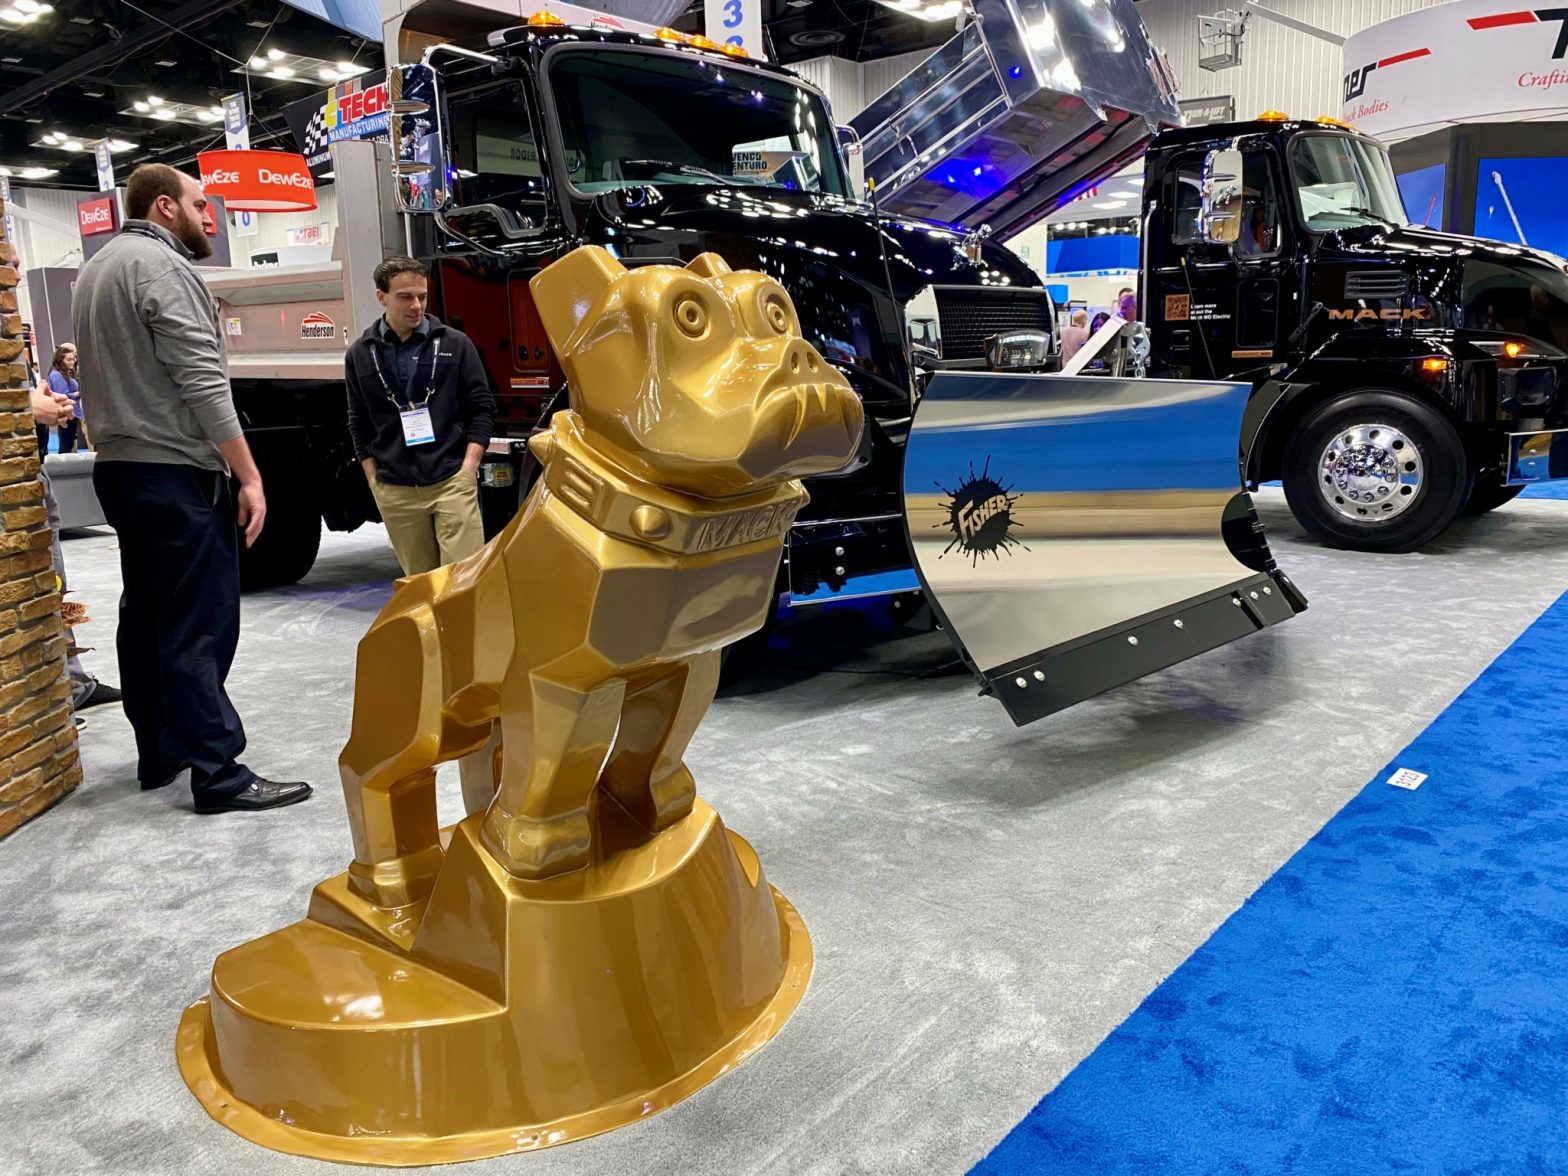 Mack Trucks on display with the bulldog in the foreground